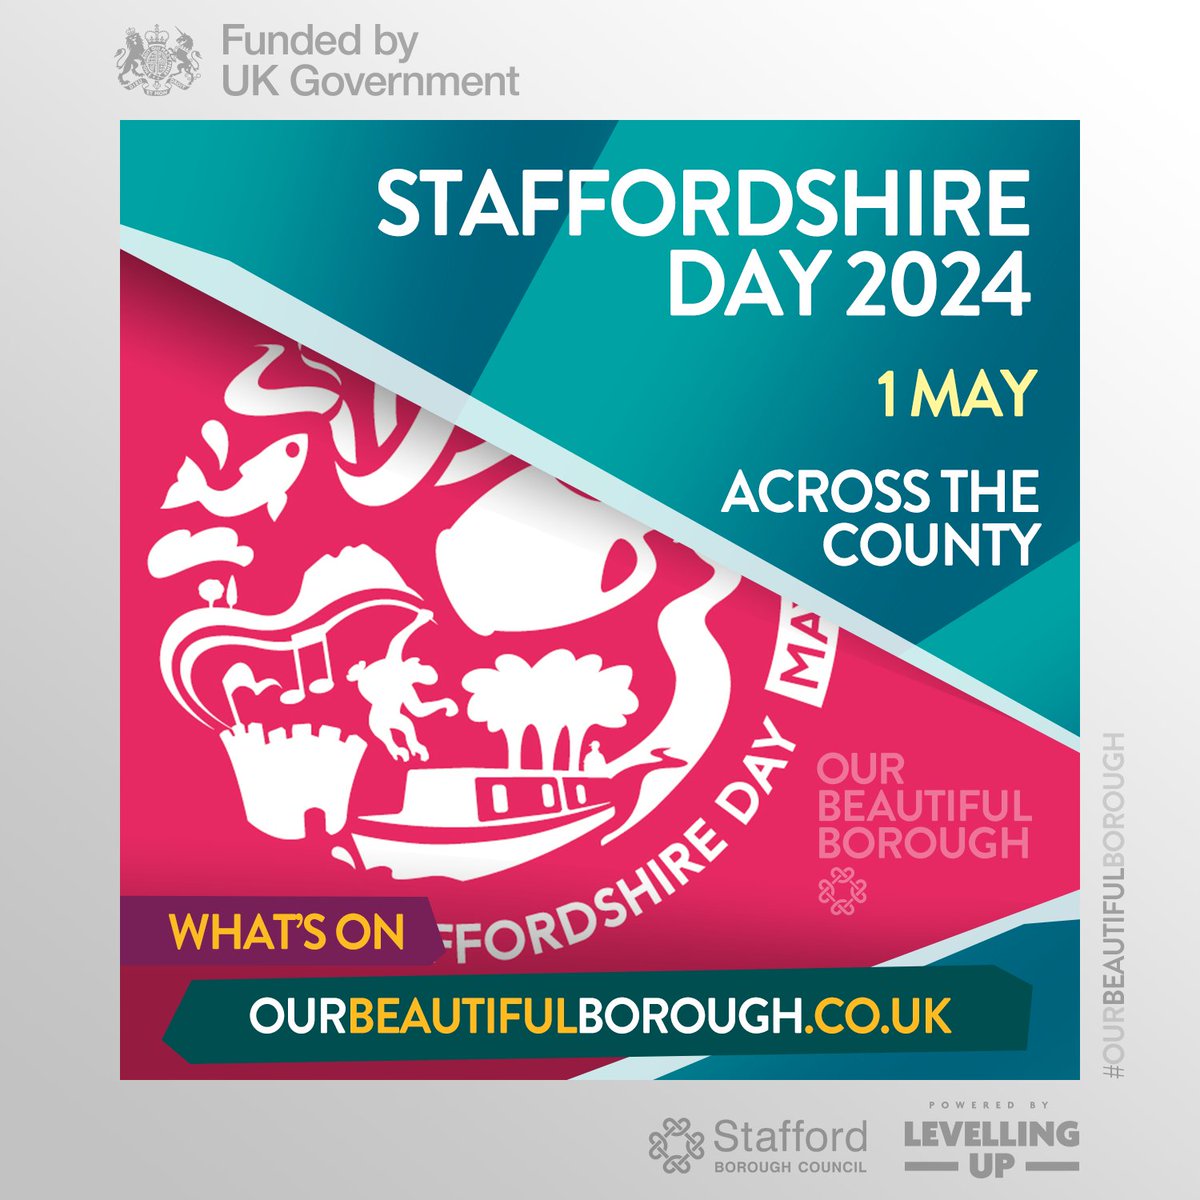 Every year on 1 May #Staffordshire comes alive with events of all shapes and sizes to celebrate our love of our beautiful, historic, and welcoming county. Competitions, special offers and more: tinyurl.com/mrpca84w #DaysOut #FamilyFun #OurBeautifulBorough #StaffordshireDay